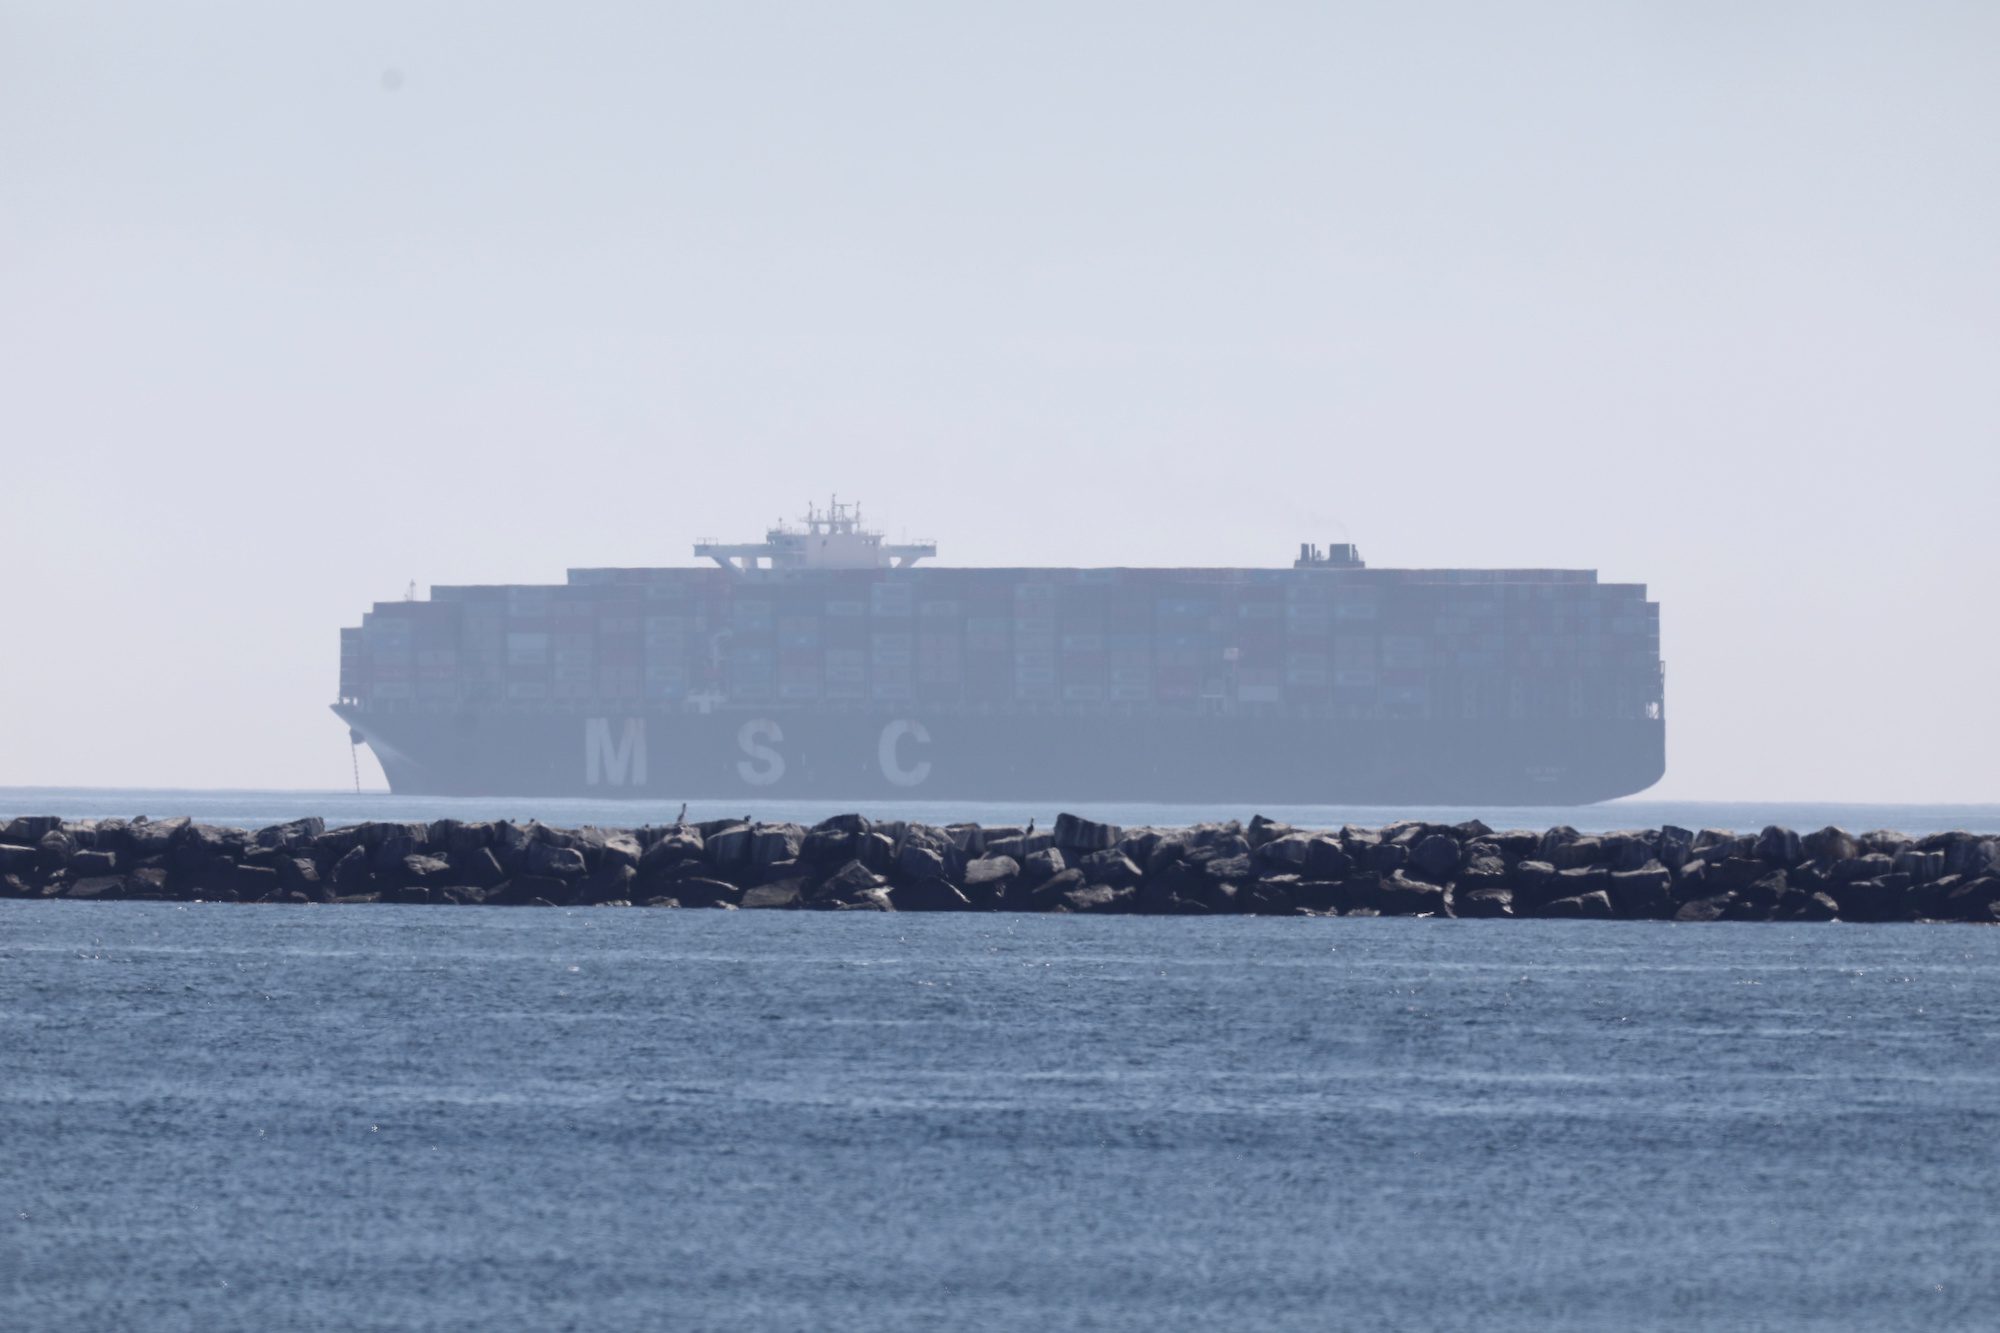 The container ship MSC Danit is seen the day after U.S. Coast Guard and National Transportation Safety Board (NTSB) marine casualty investigators boarded the container ship, off the Port of Long Beach, California, U.S. October 17, 2021. REUTERS/David Swanson